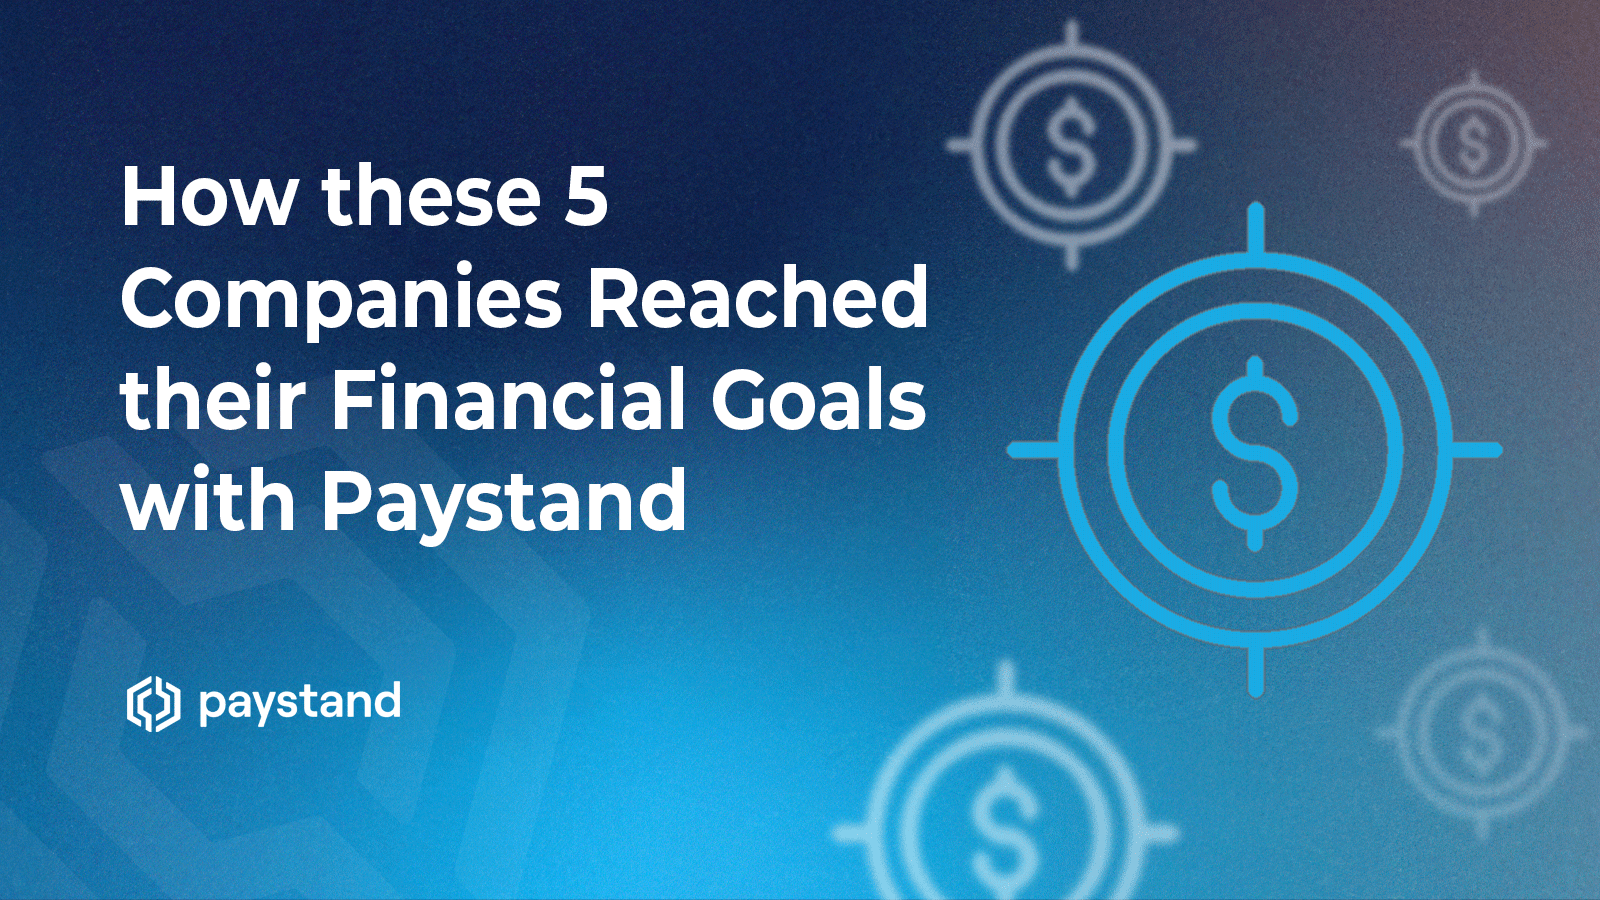 How these 5 Companies Reached their Financial Goals with Paystand